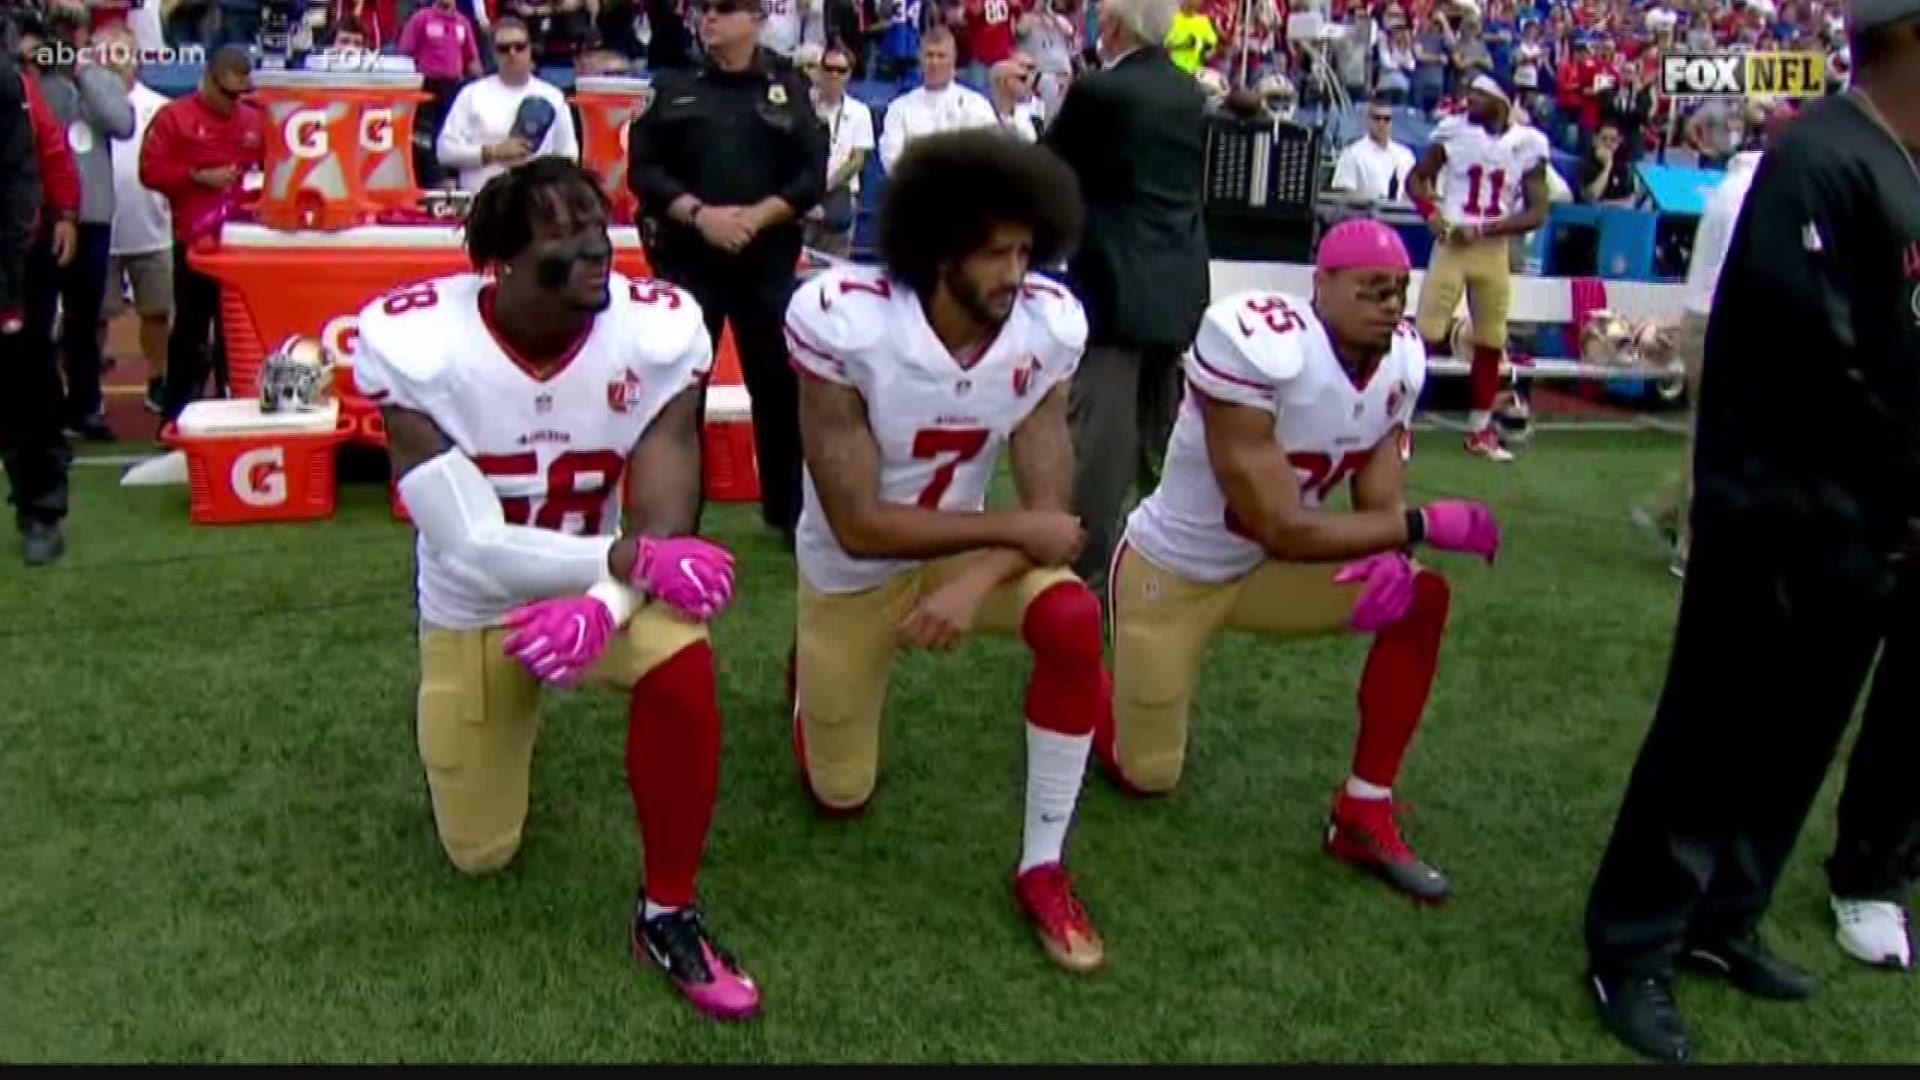 NFL coaches, players, fans and now President Trump are all weighing in on the league's new rules on kneeling during the National Anthem.